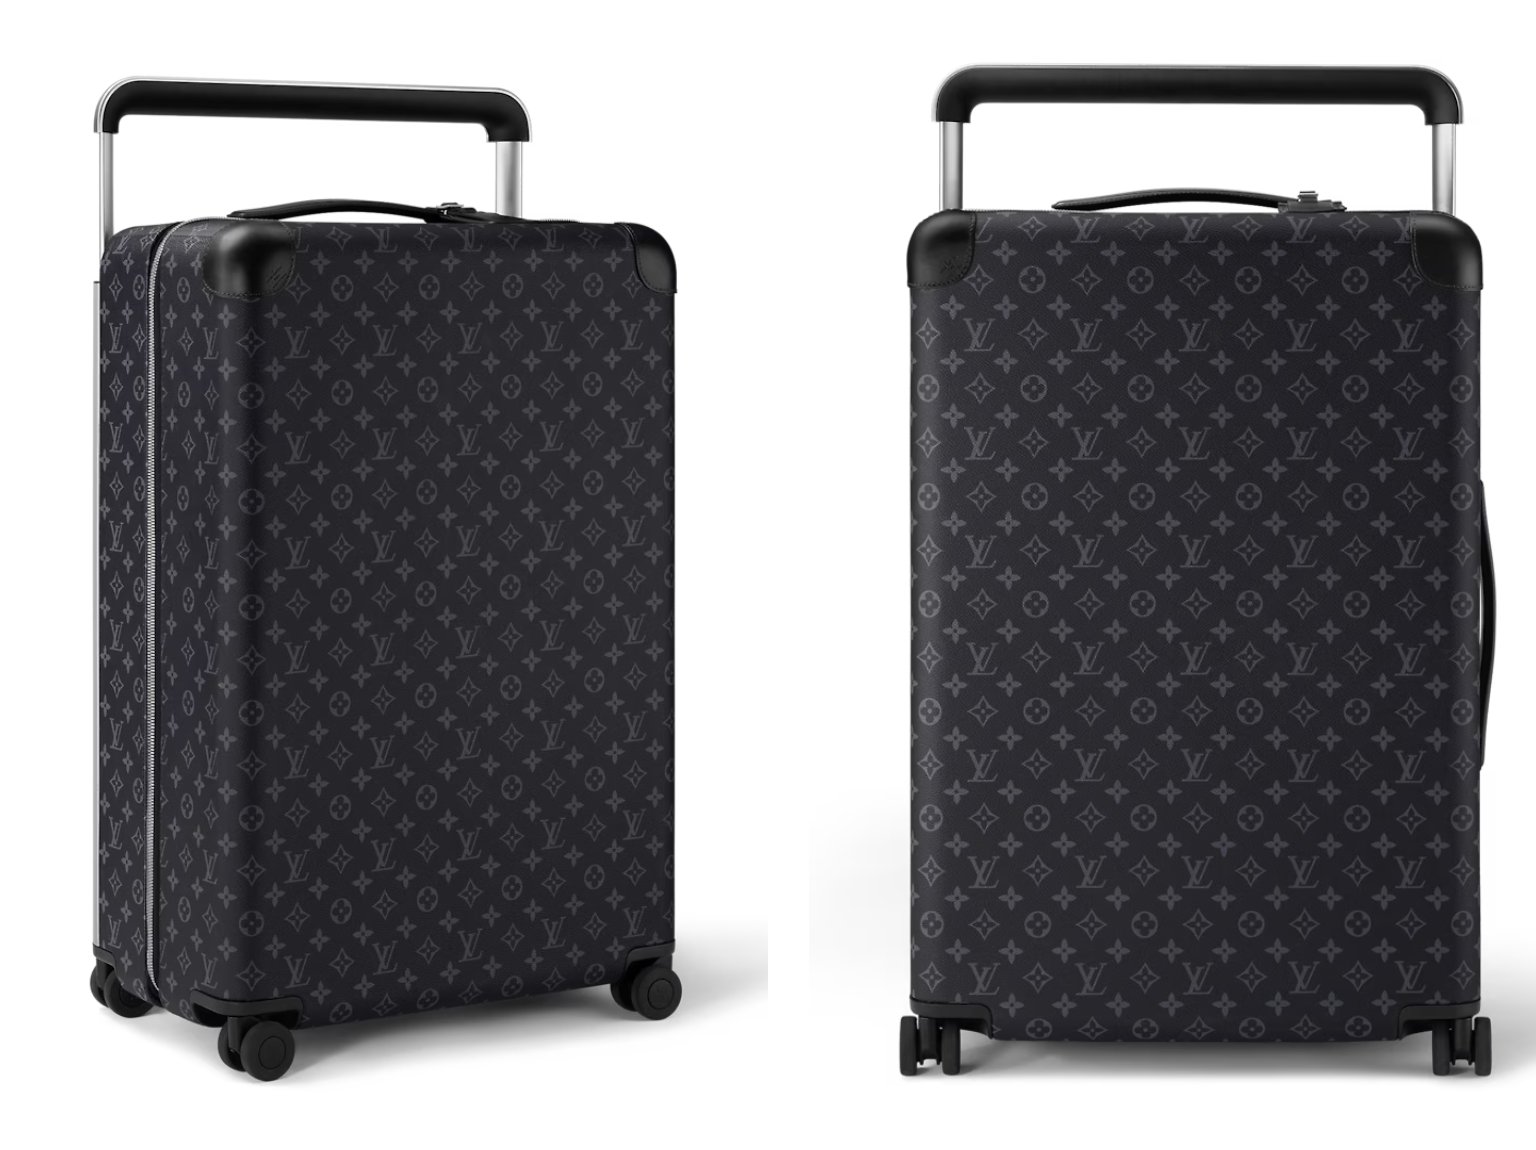 The Best Luxury Luggage to Invest In for 2023